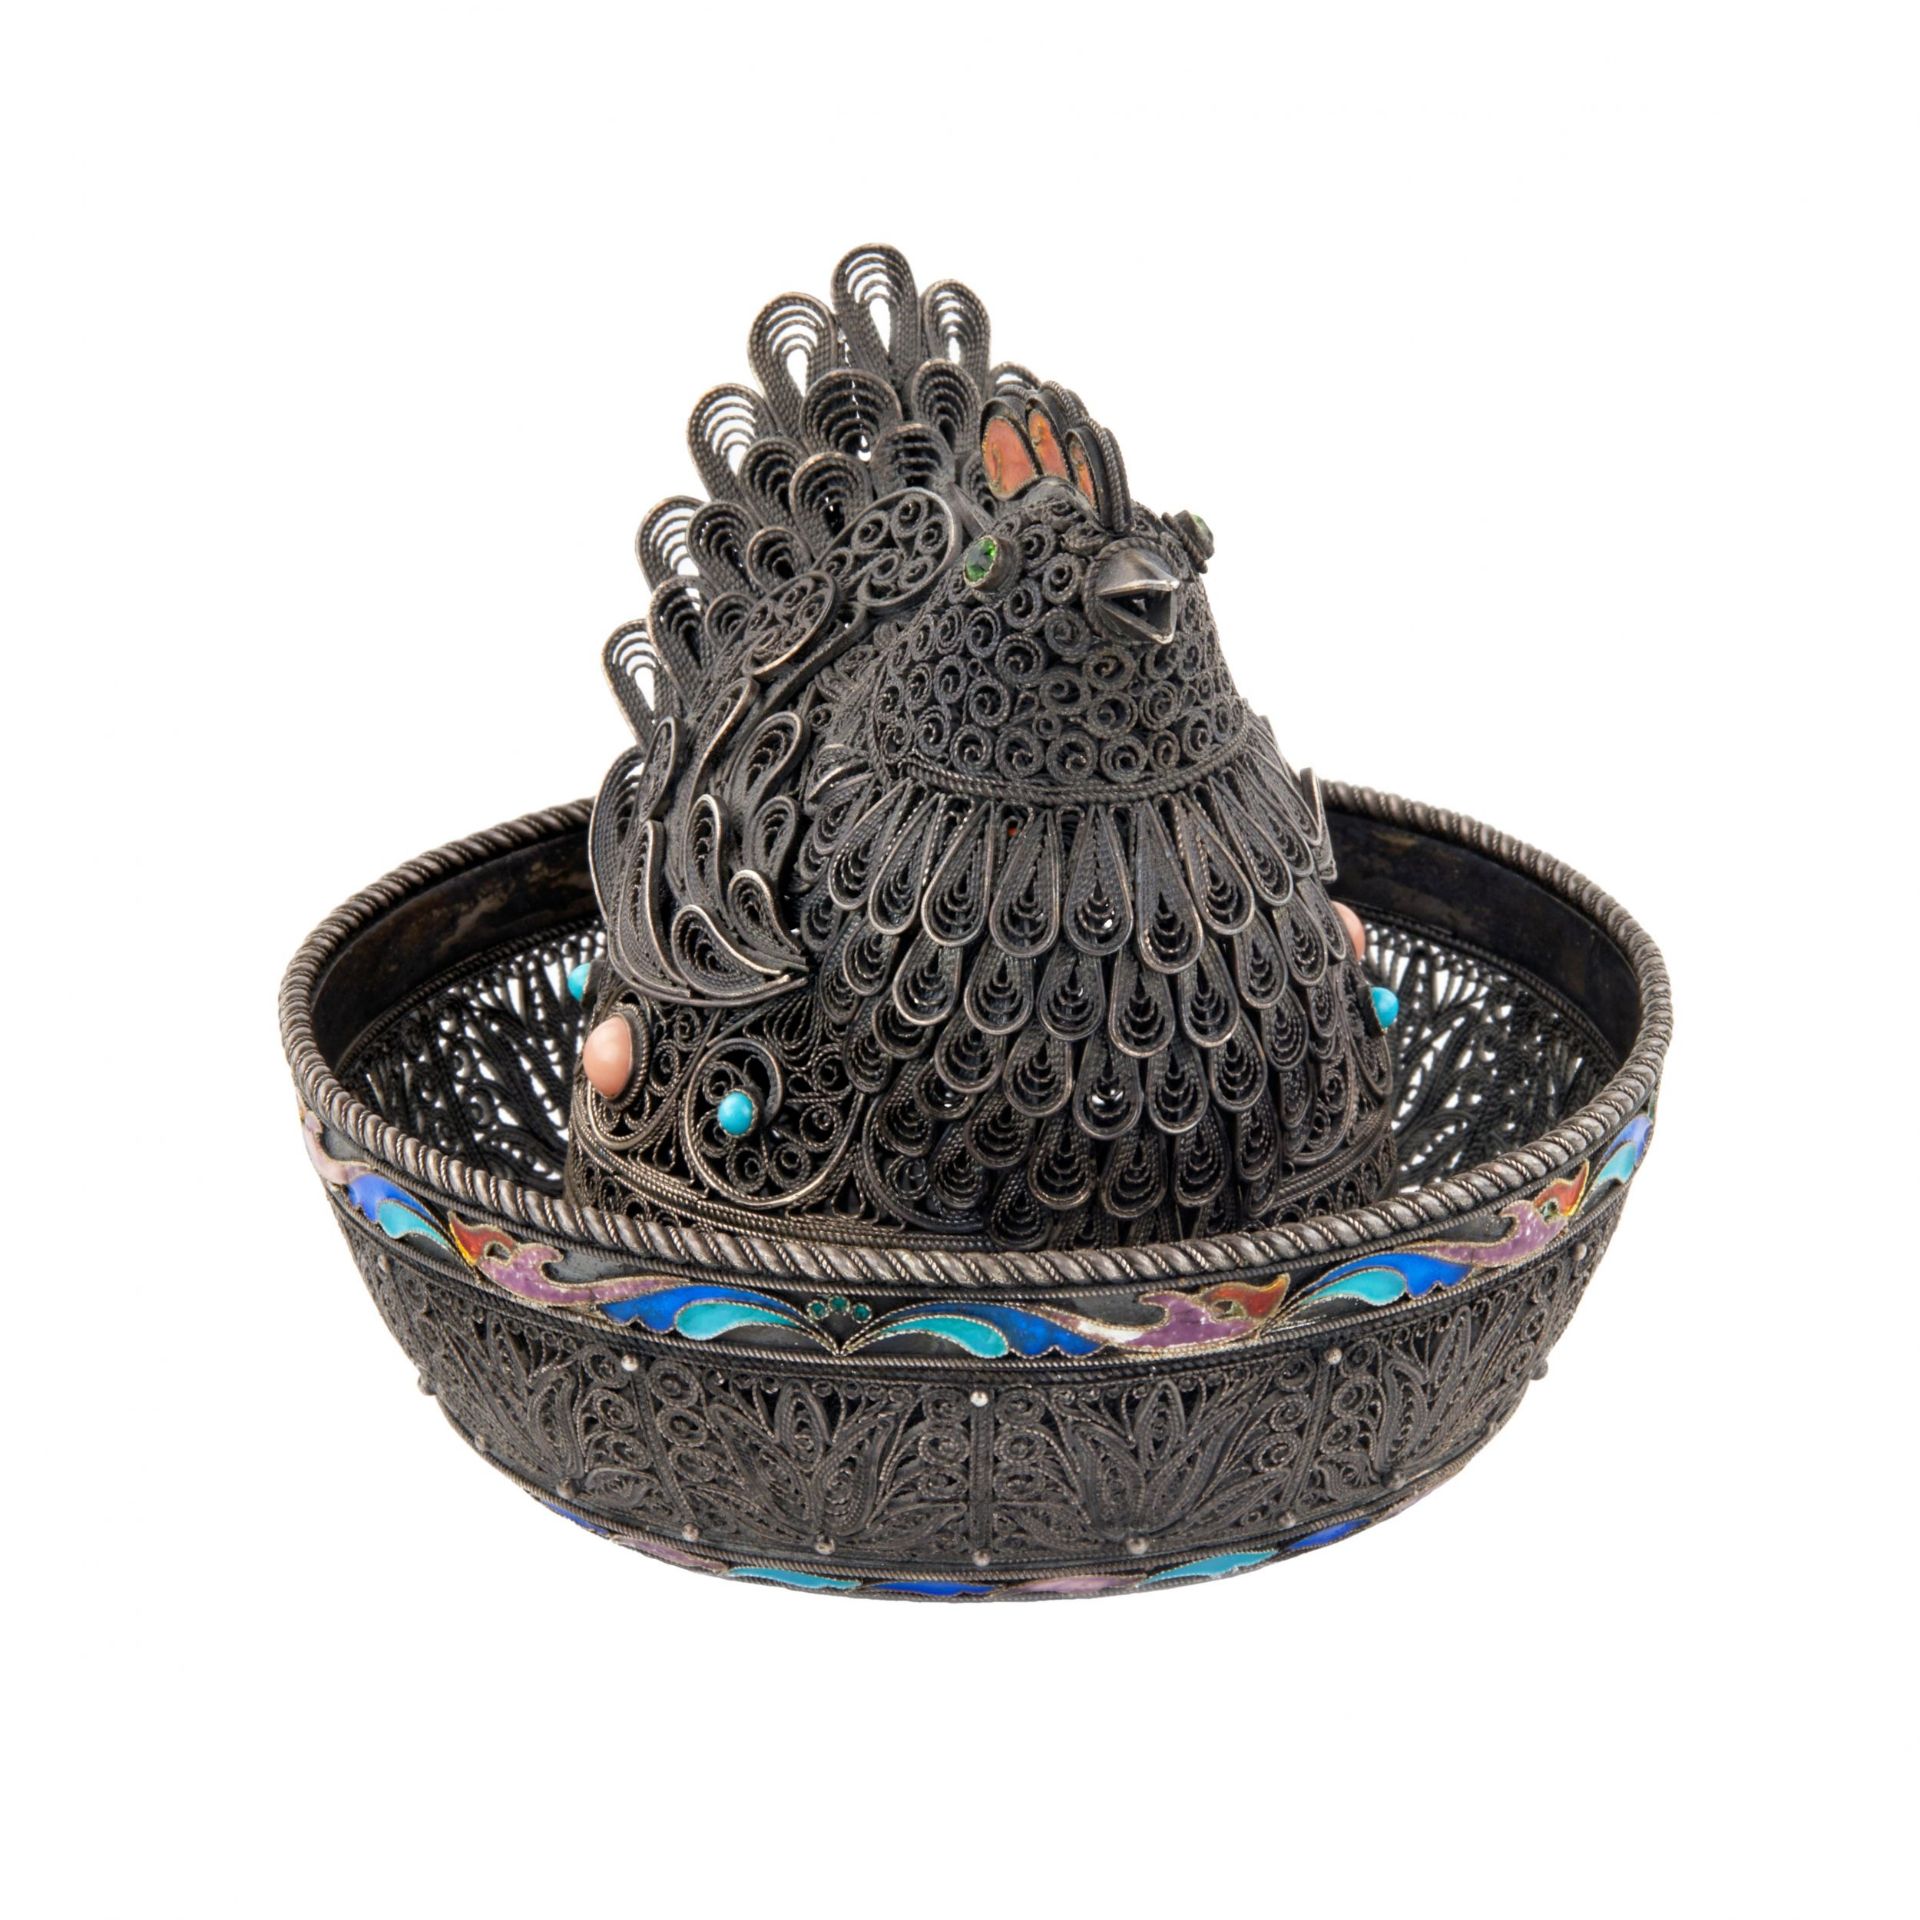 Easter plow pot made of silver with enamel - Hen. - Image 2 of 7